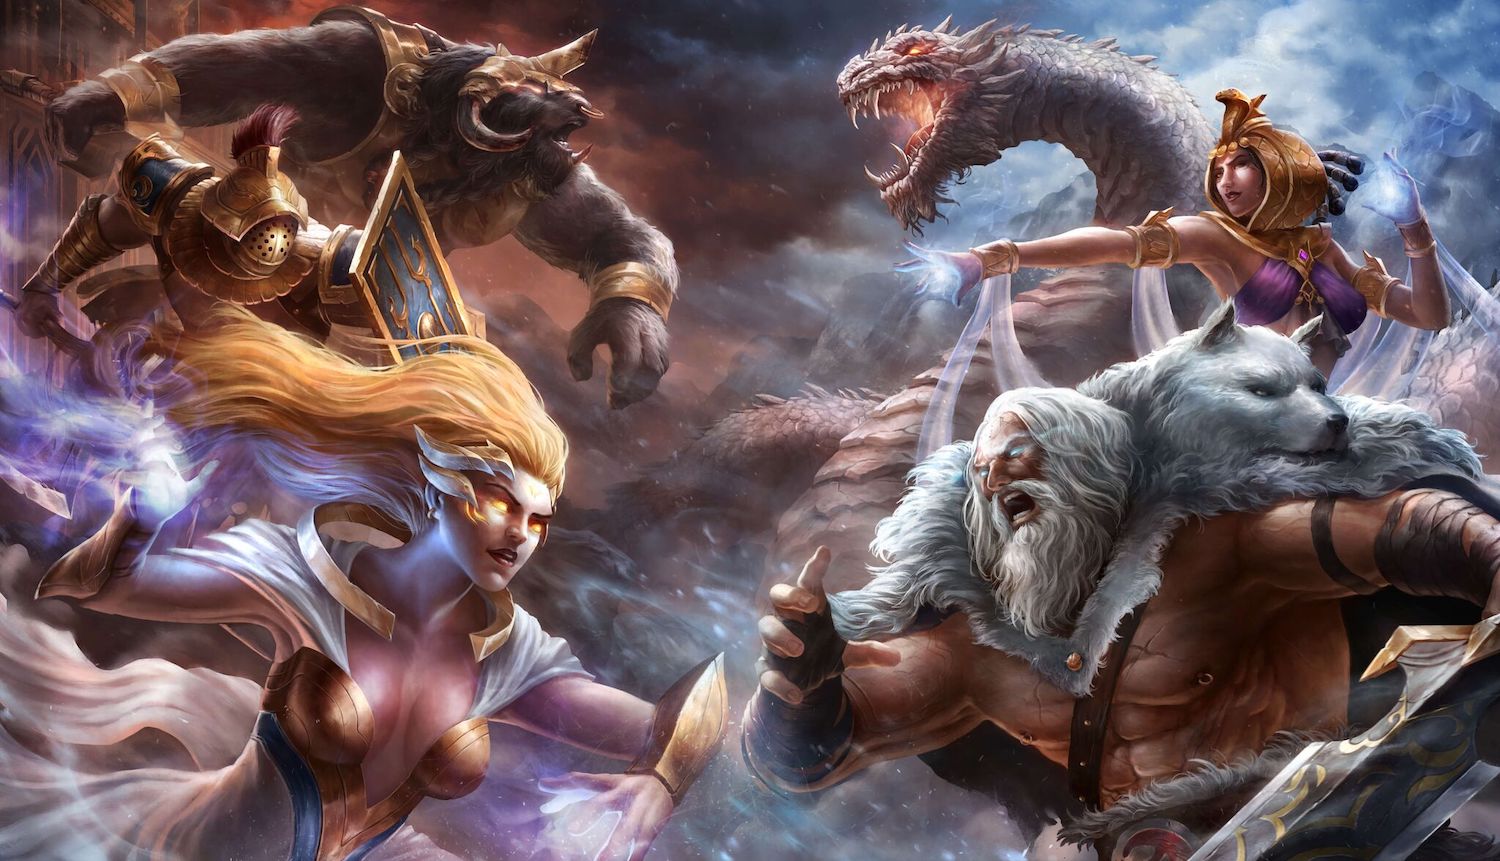 Coinbase-Backed ‘Gods Unchained’ Releases Gameplay Trailer